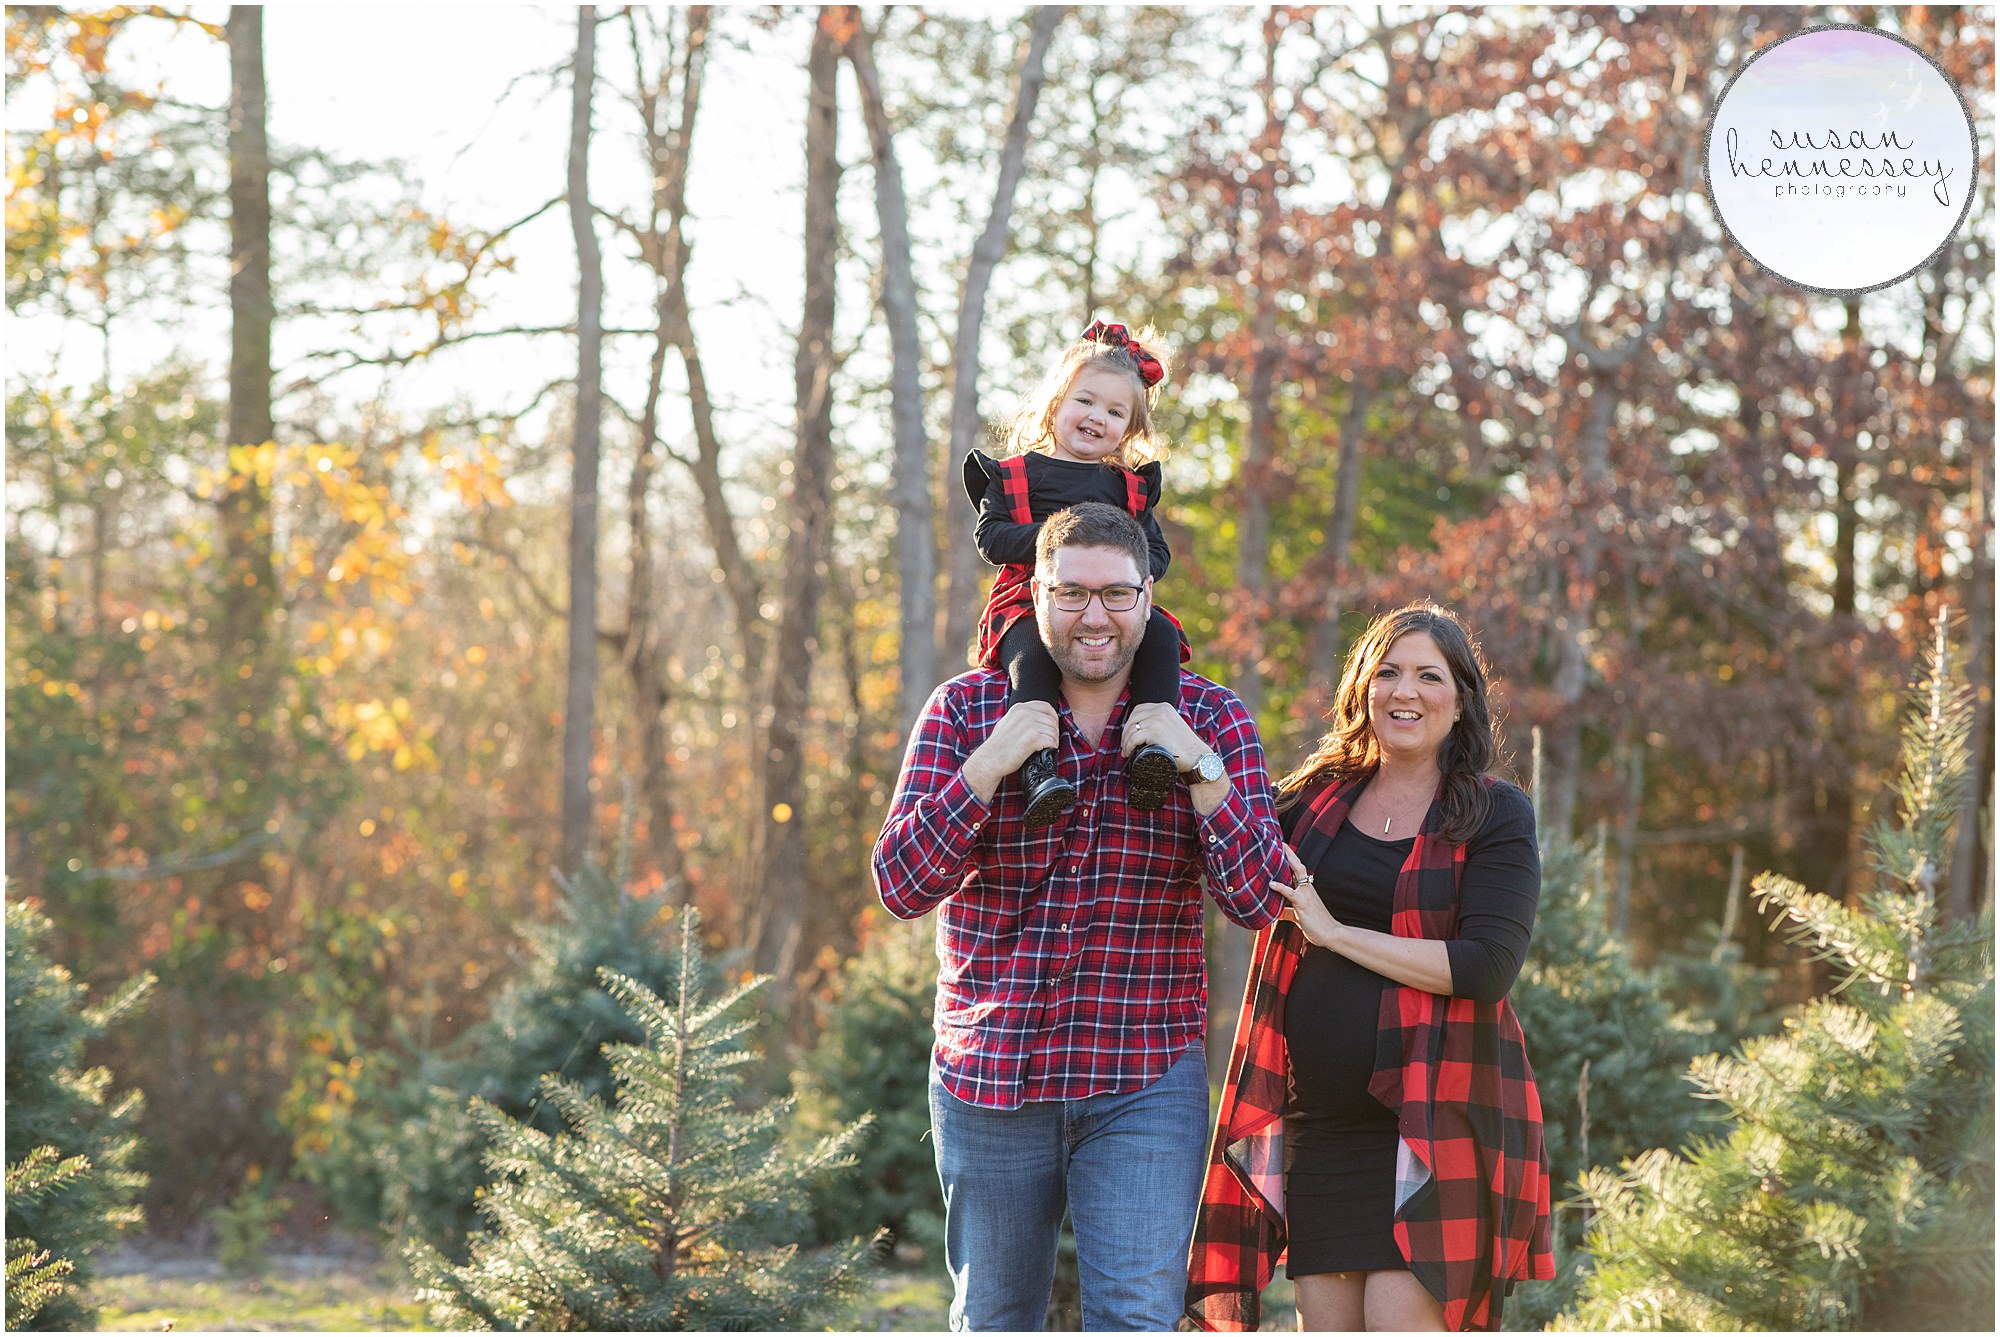 Susan Hennessey Photography, a photographer based in Moorestown, NJ photographs yearly South Jersey holiday family photo sessions at Christmas Tree Farms.